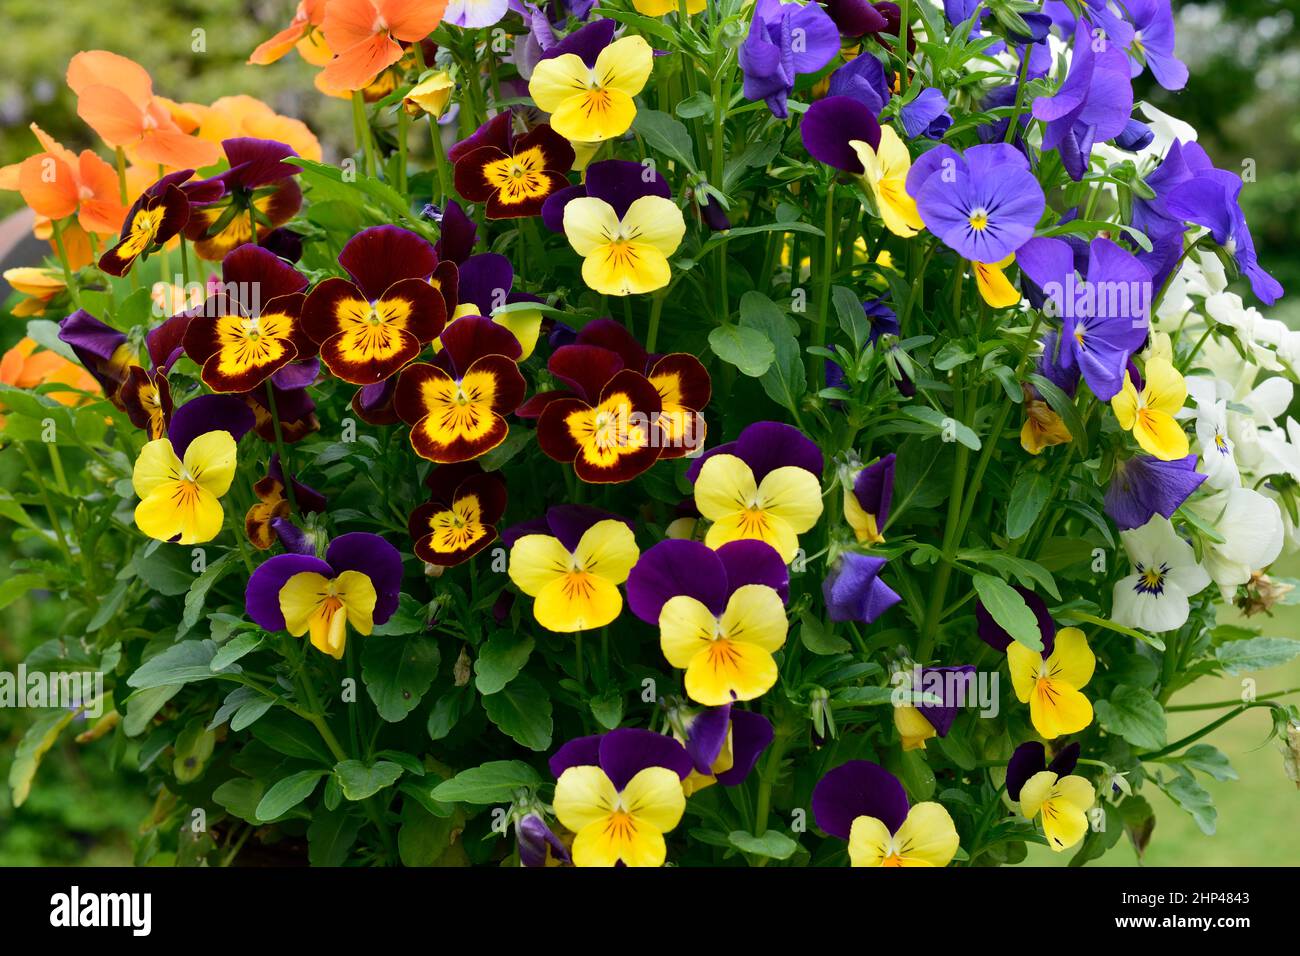 Viola mixture colourful small flowers growing together in a bunch. Stock Photo